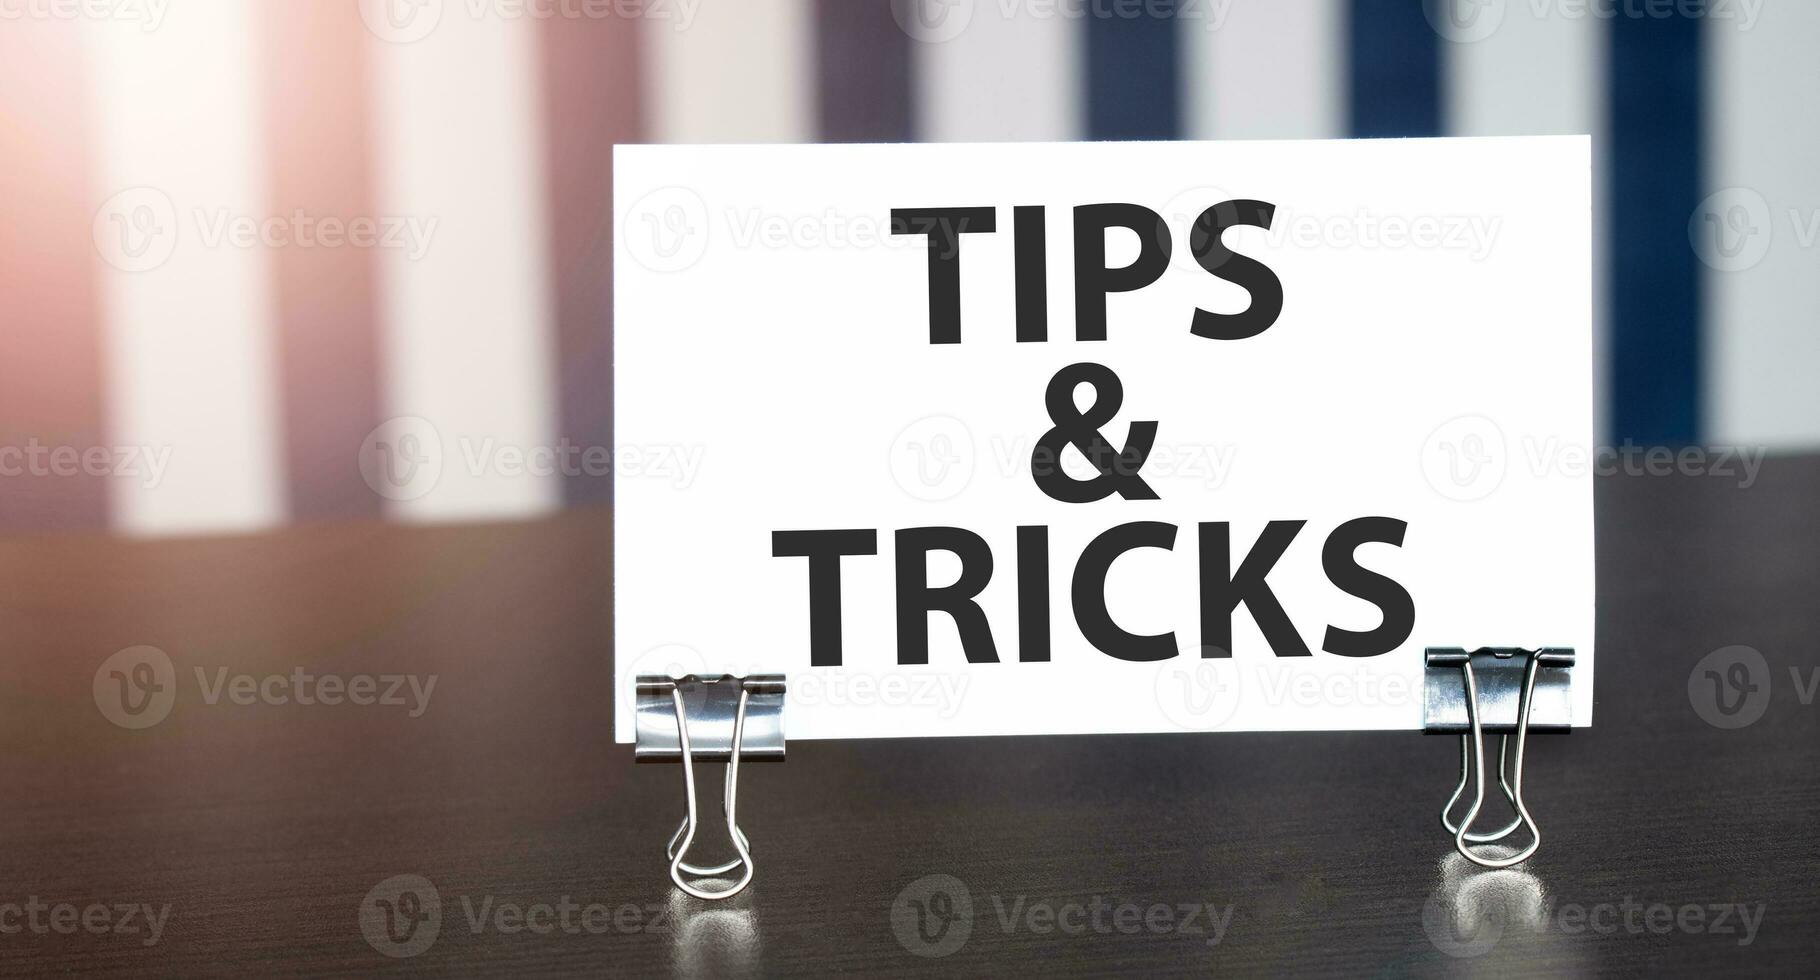 TIPS AND TRICKS sign on paper on dark desk in sunlight. Blue and white background photo